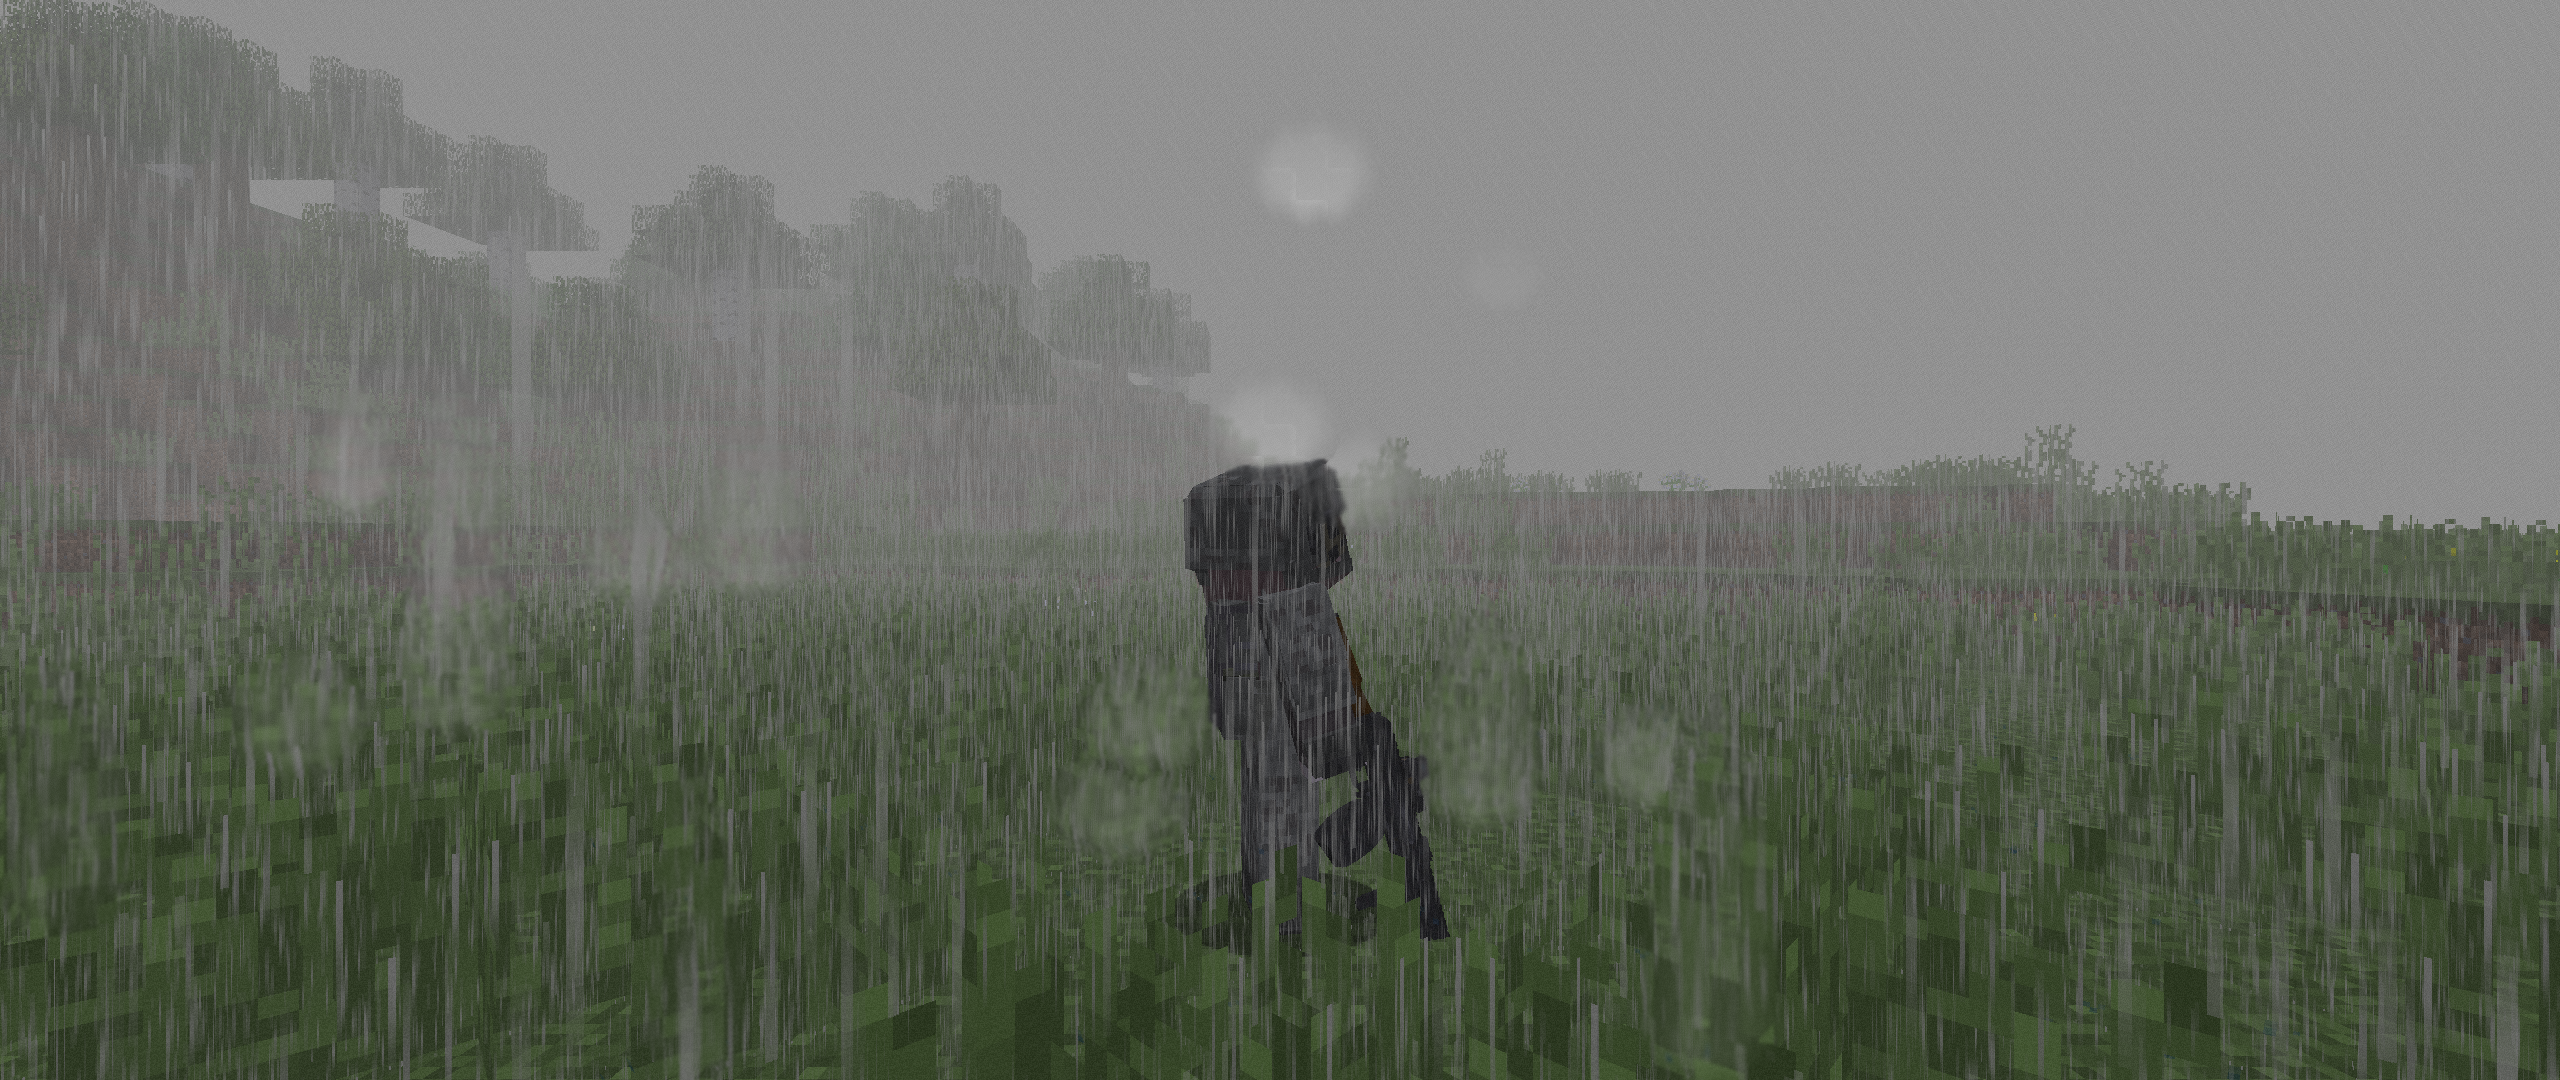 Here is the improved weather in-game